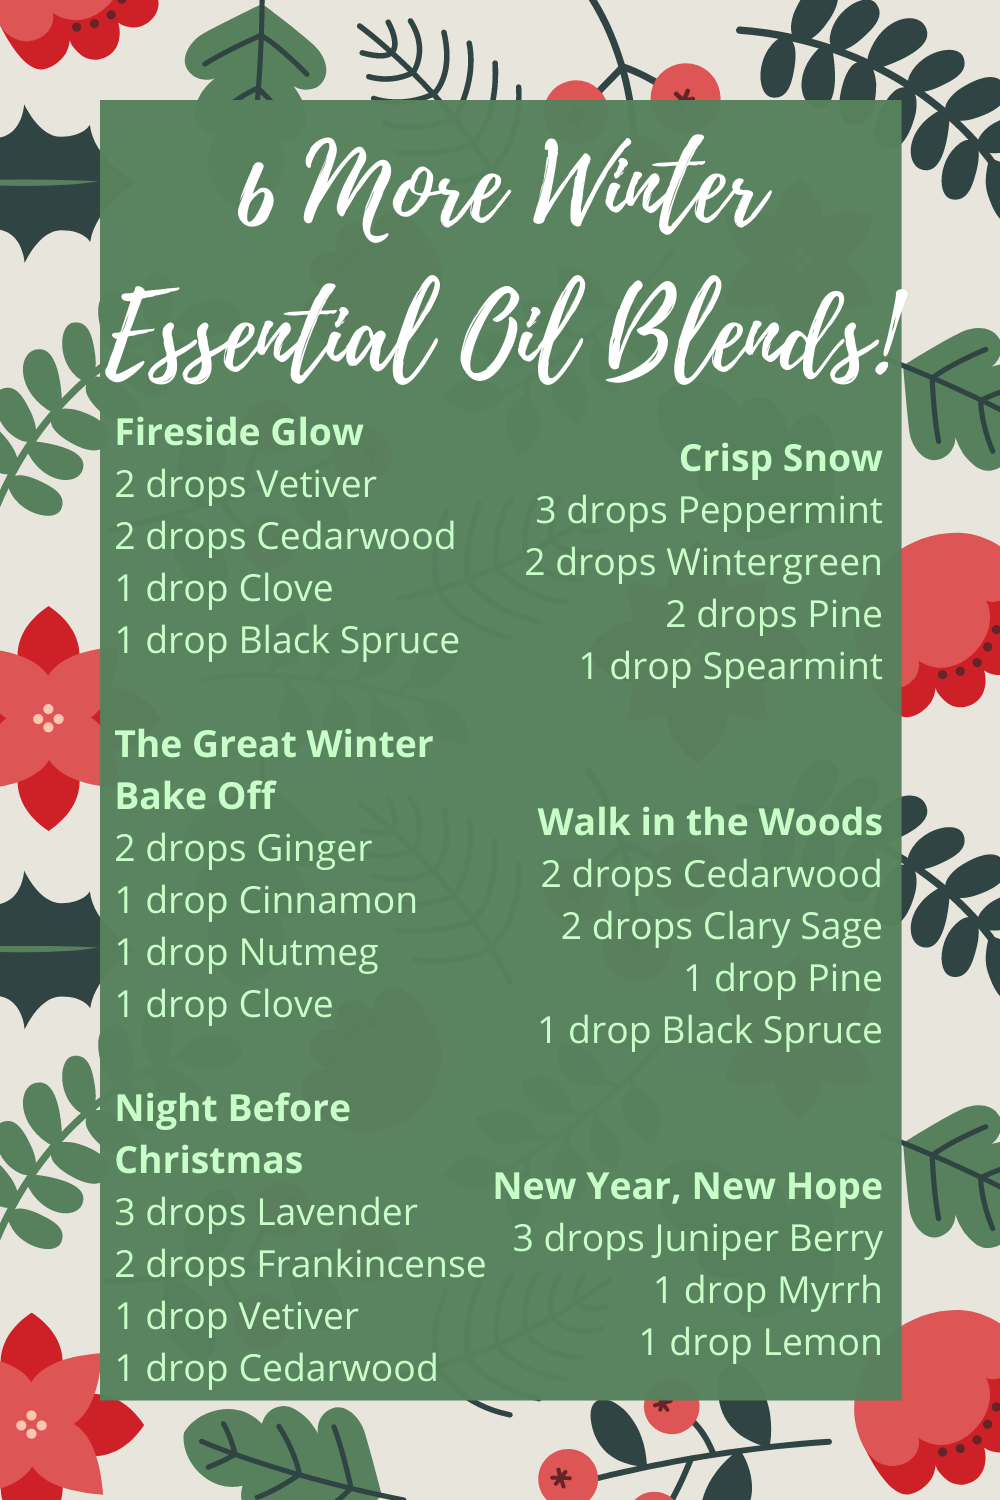 Winter Essential Oil Blends for Crafting Natural Perfume Recipes